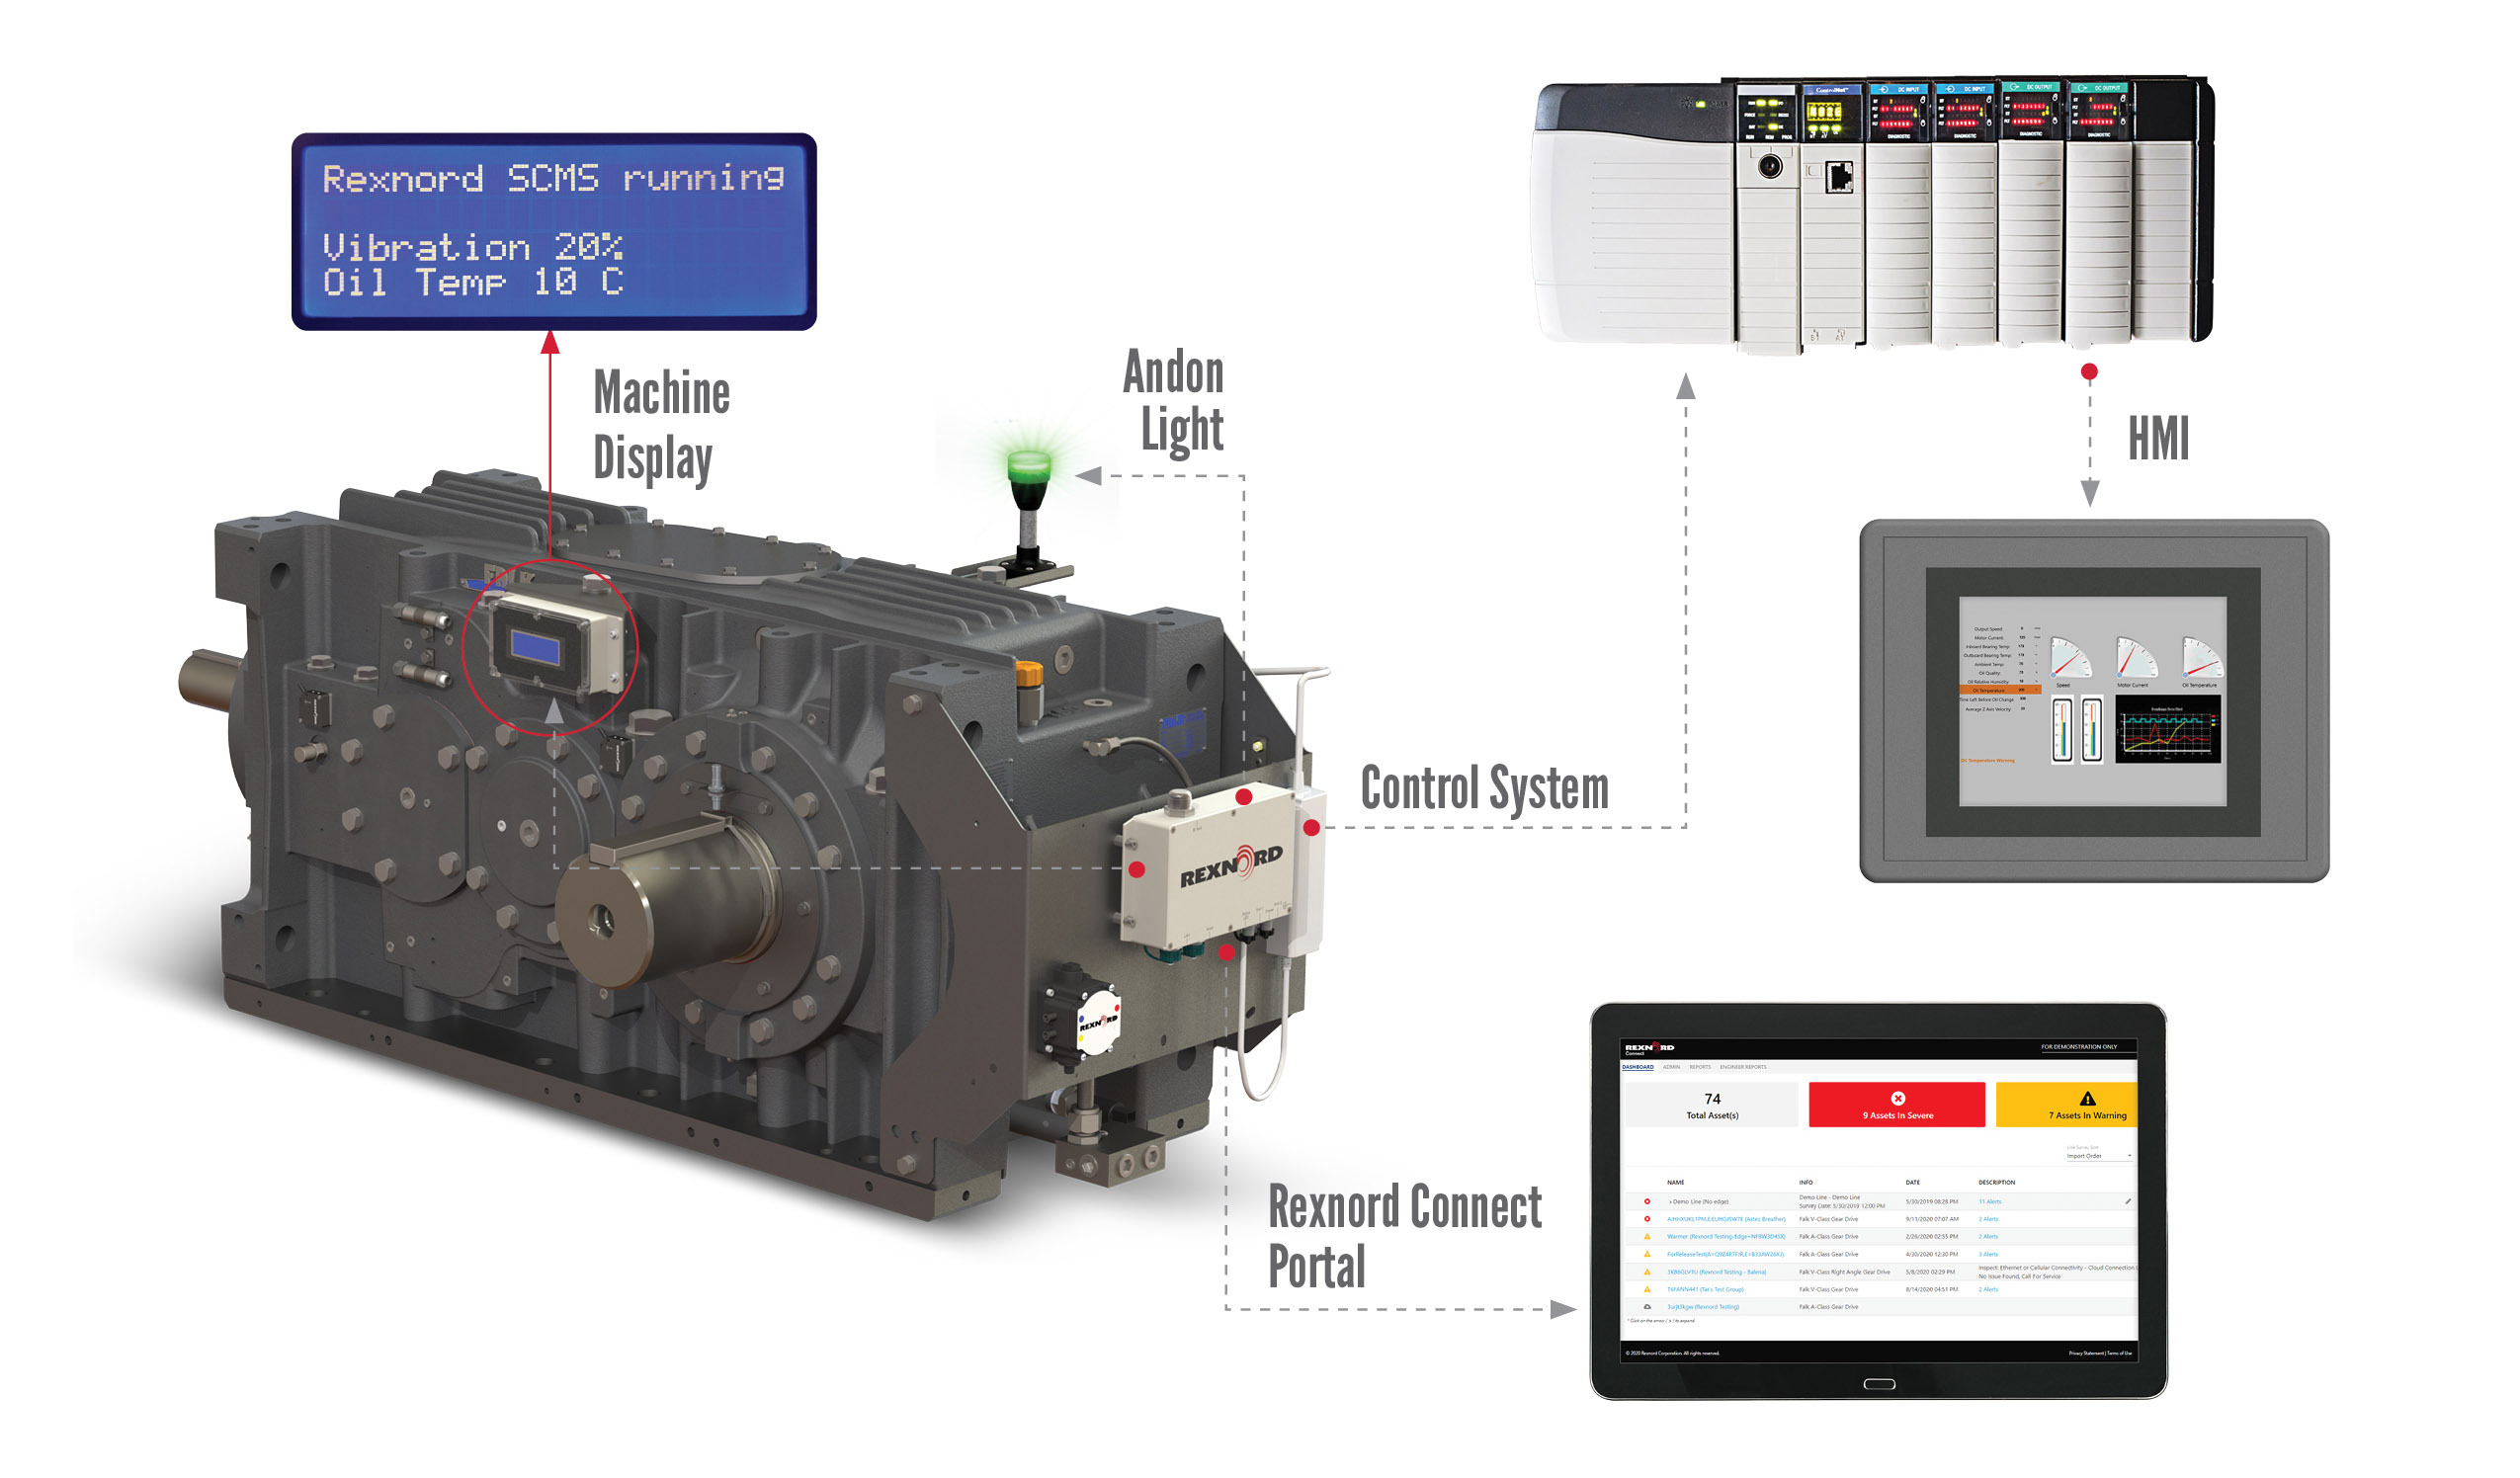 Rexnord Launches the Only Universal Smart Condition Monitoring System  Capable of Monitoring Oil Quality, Temperature and Vibration on Most Large  Gear Drives